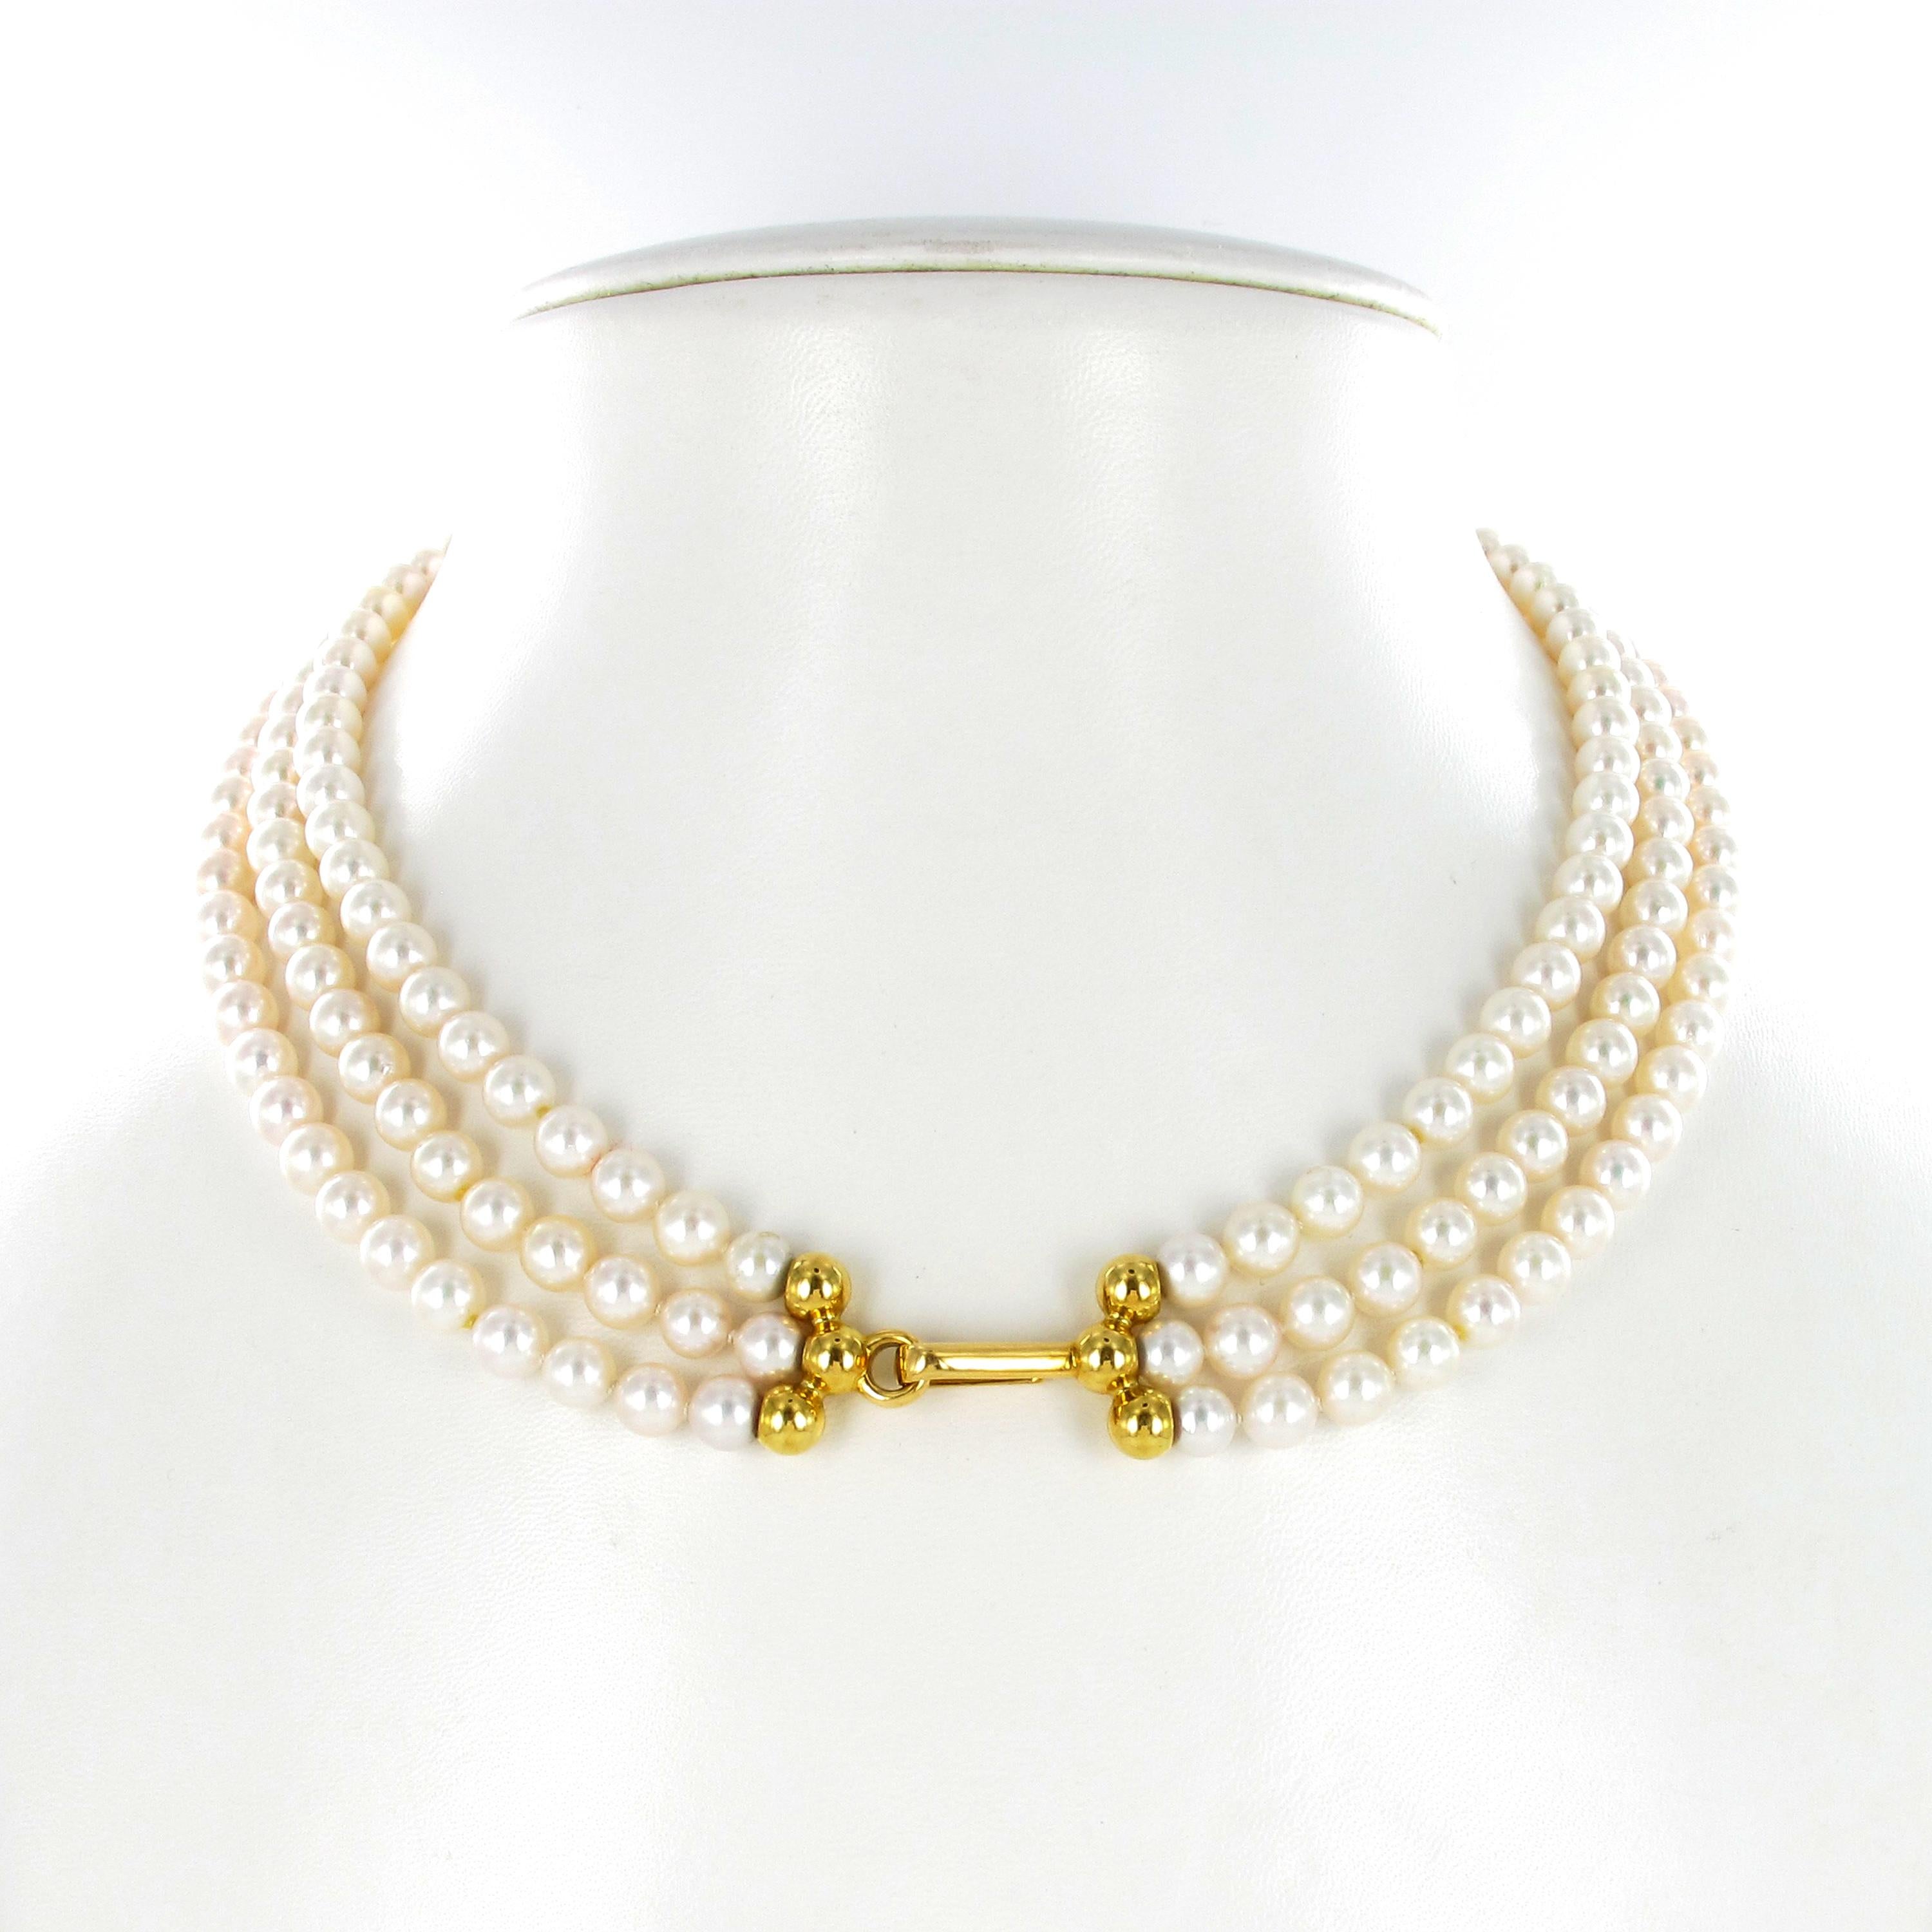 Women's or Men's Exquisite Citrine, Ebony and Akoya Cultured Pearl Necklace For Sale